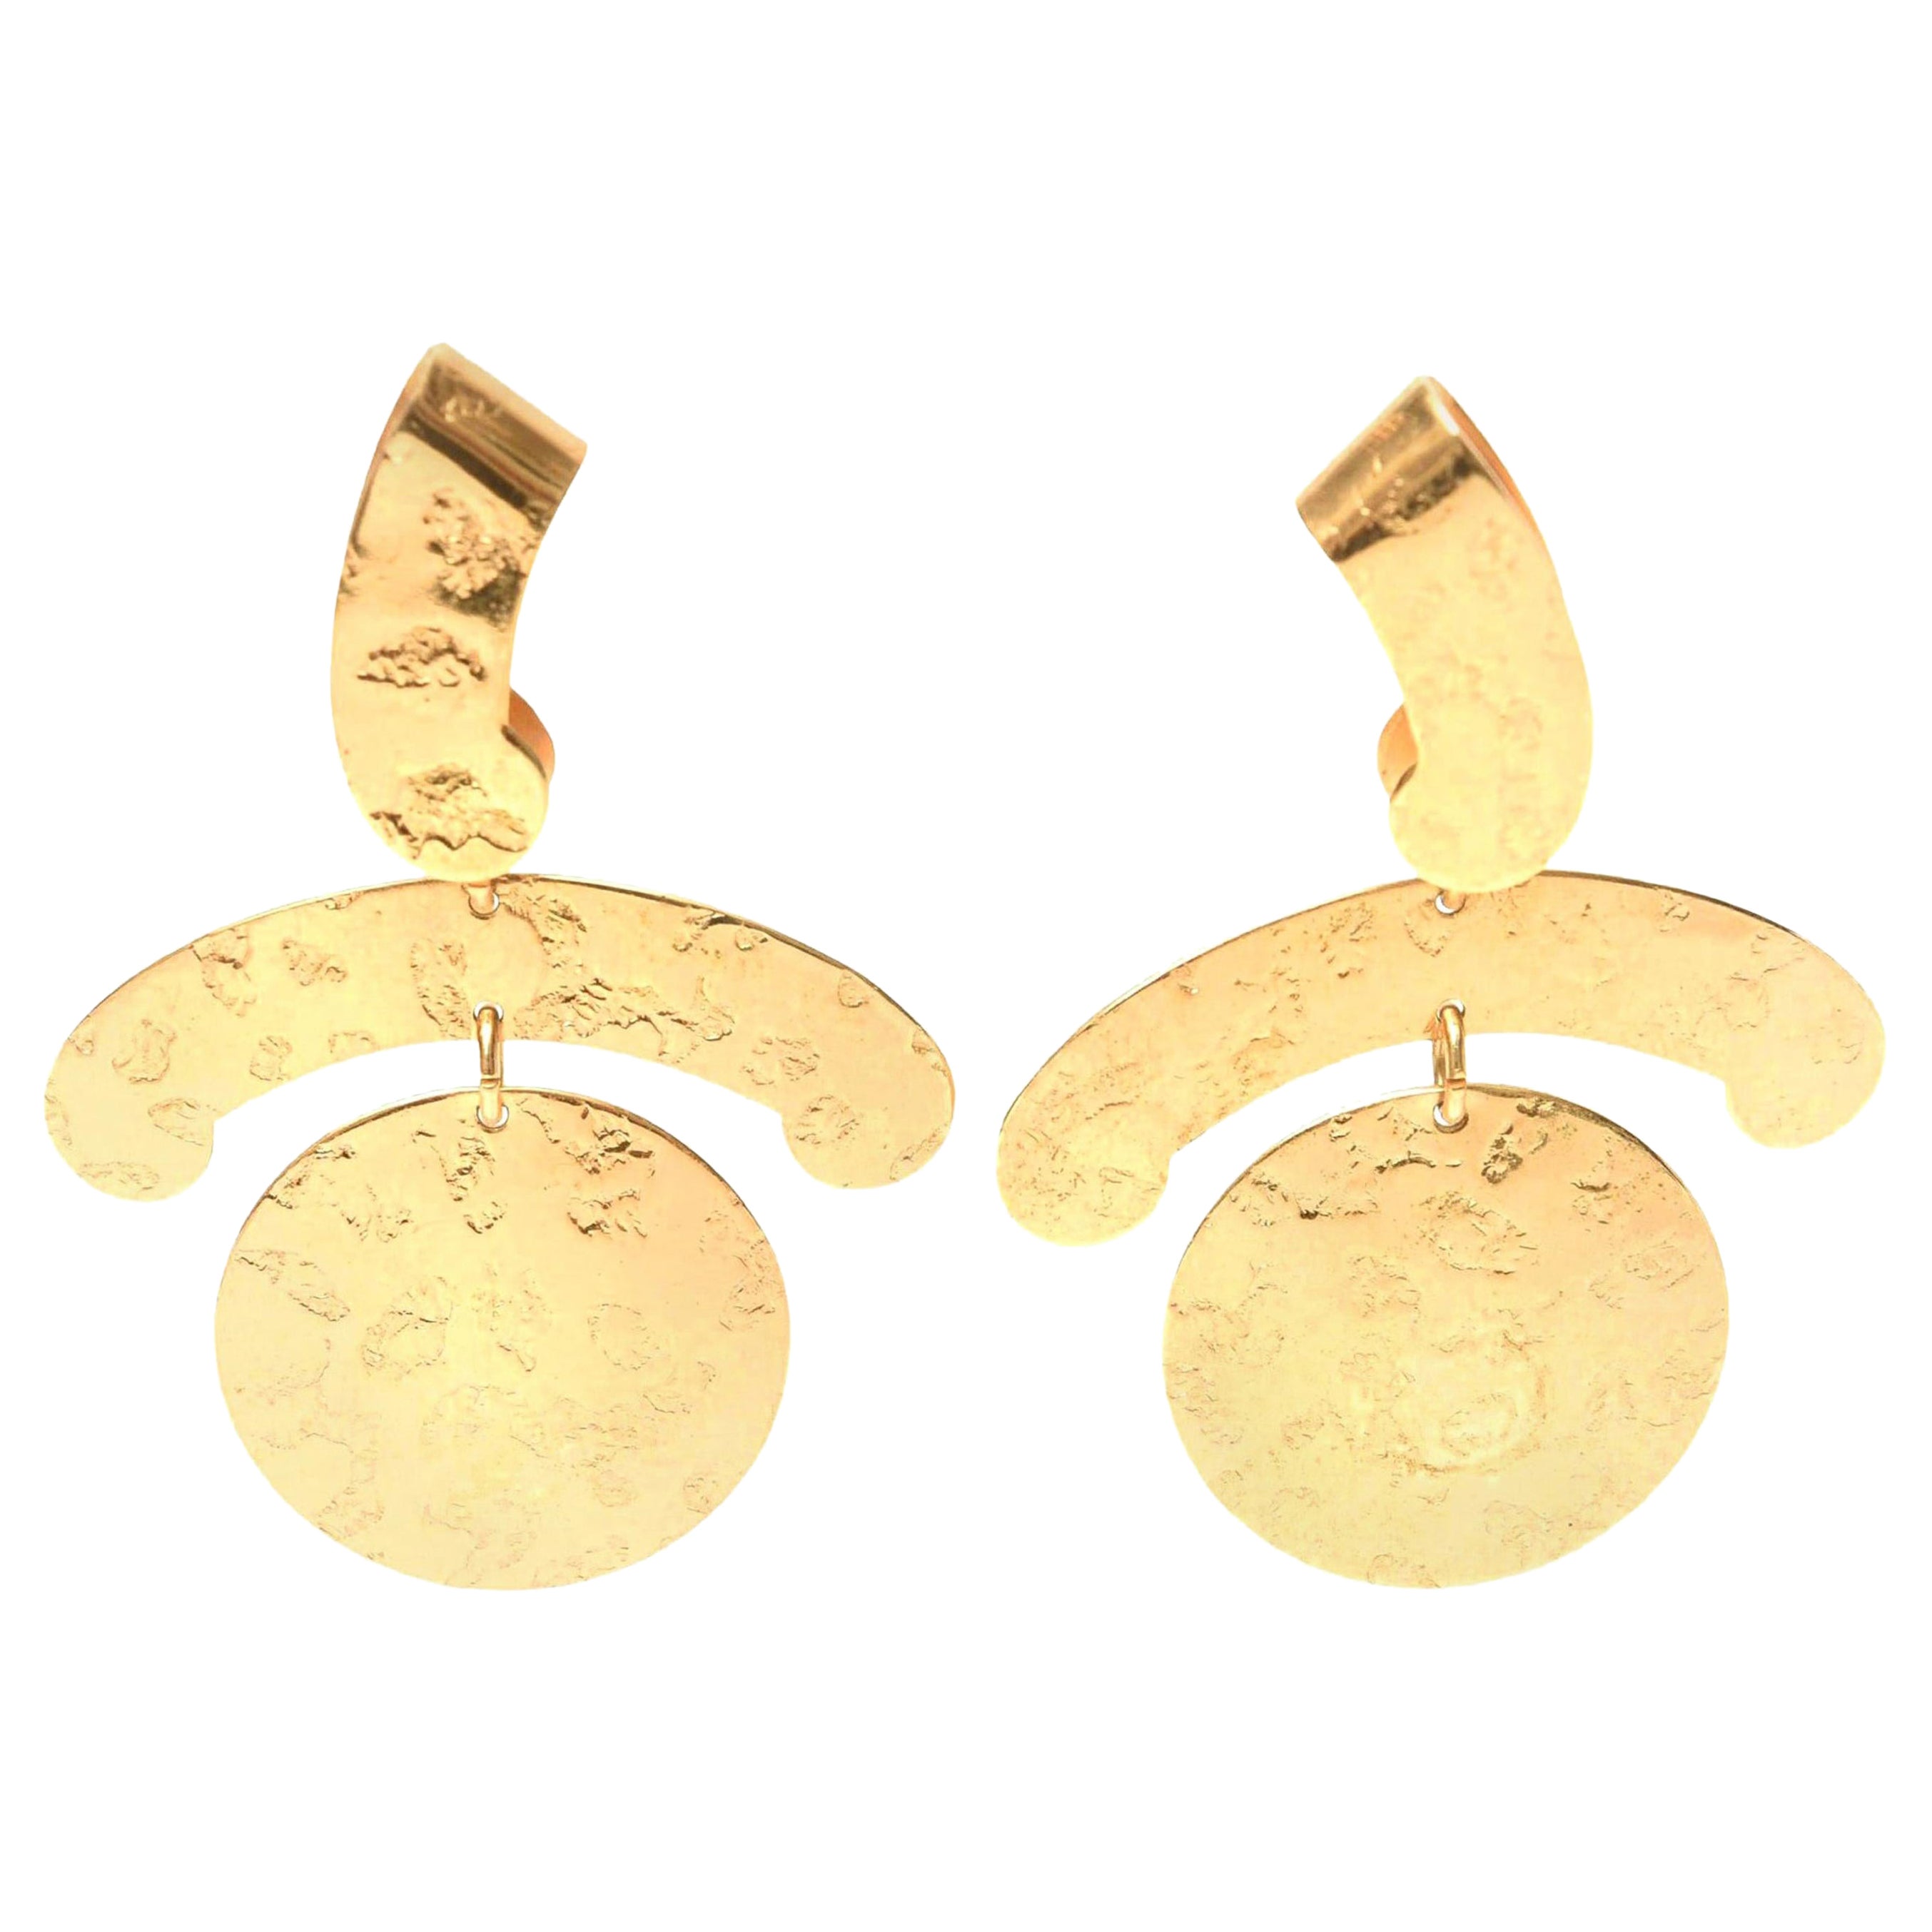  Napier Gold Plated Clip On Sculptural Earrings Vintage For Sale